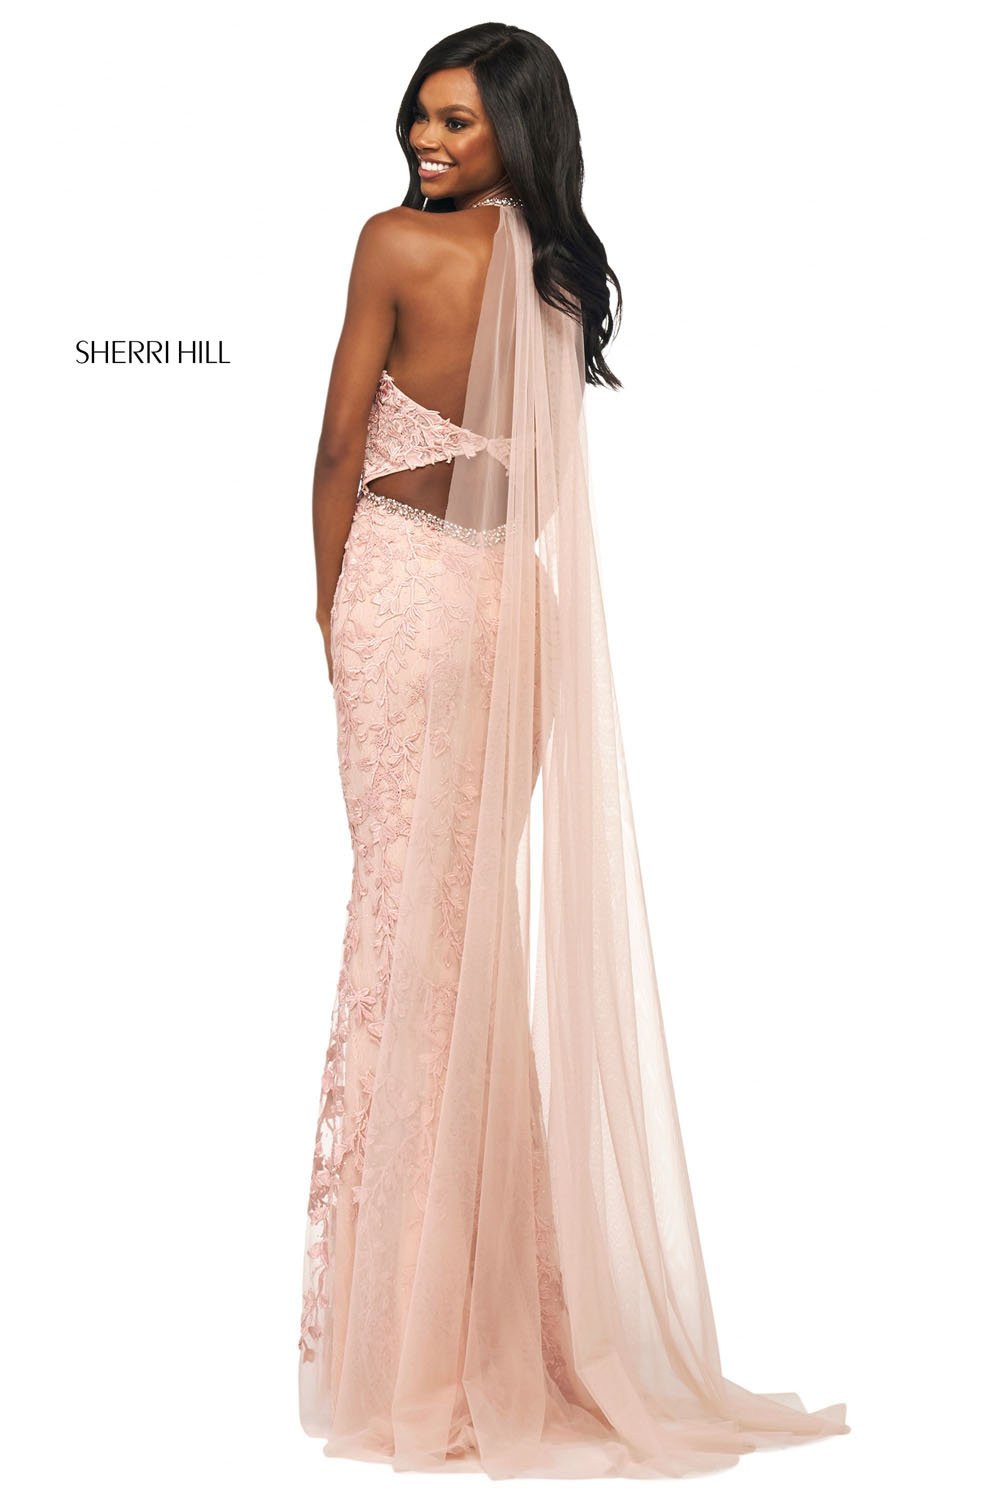 Sherri Hill 53724 dress images in these colors: Light Blue, Red, Yellow, Ivory, Blush, Black.